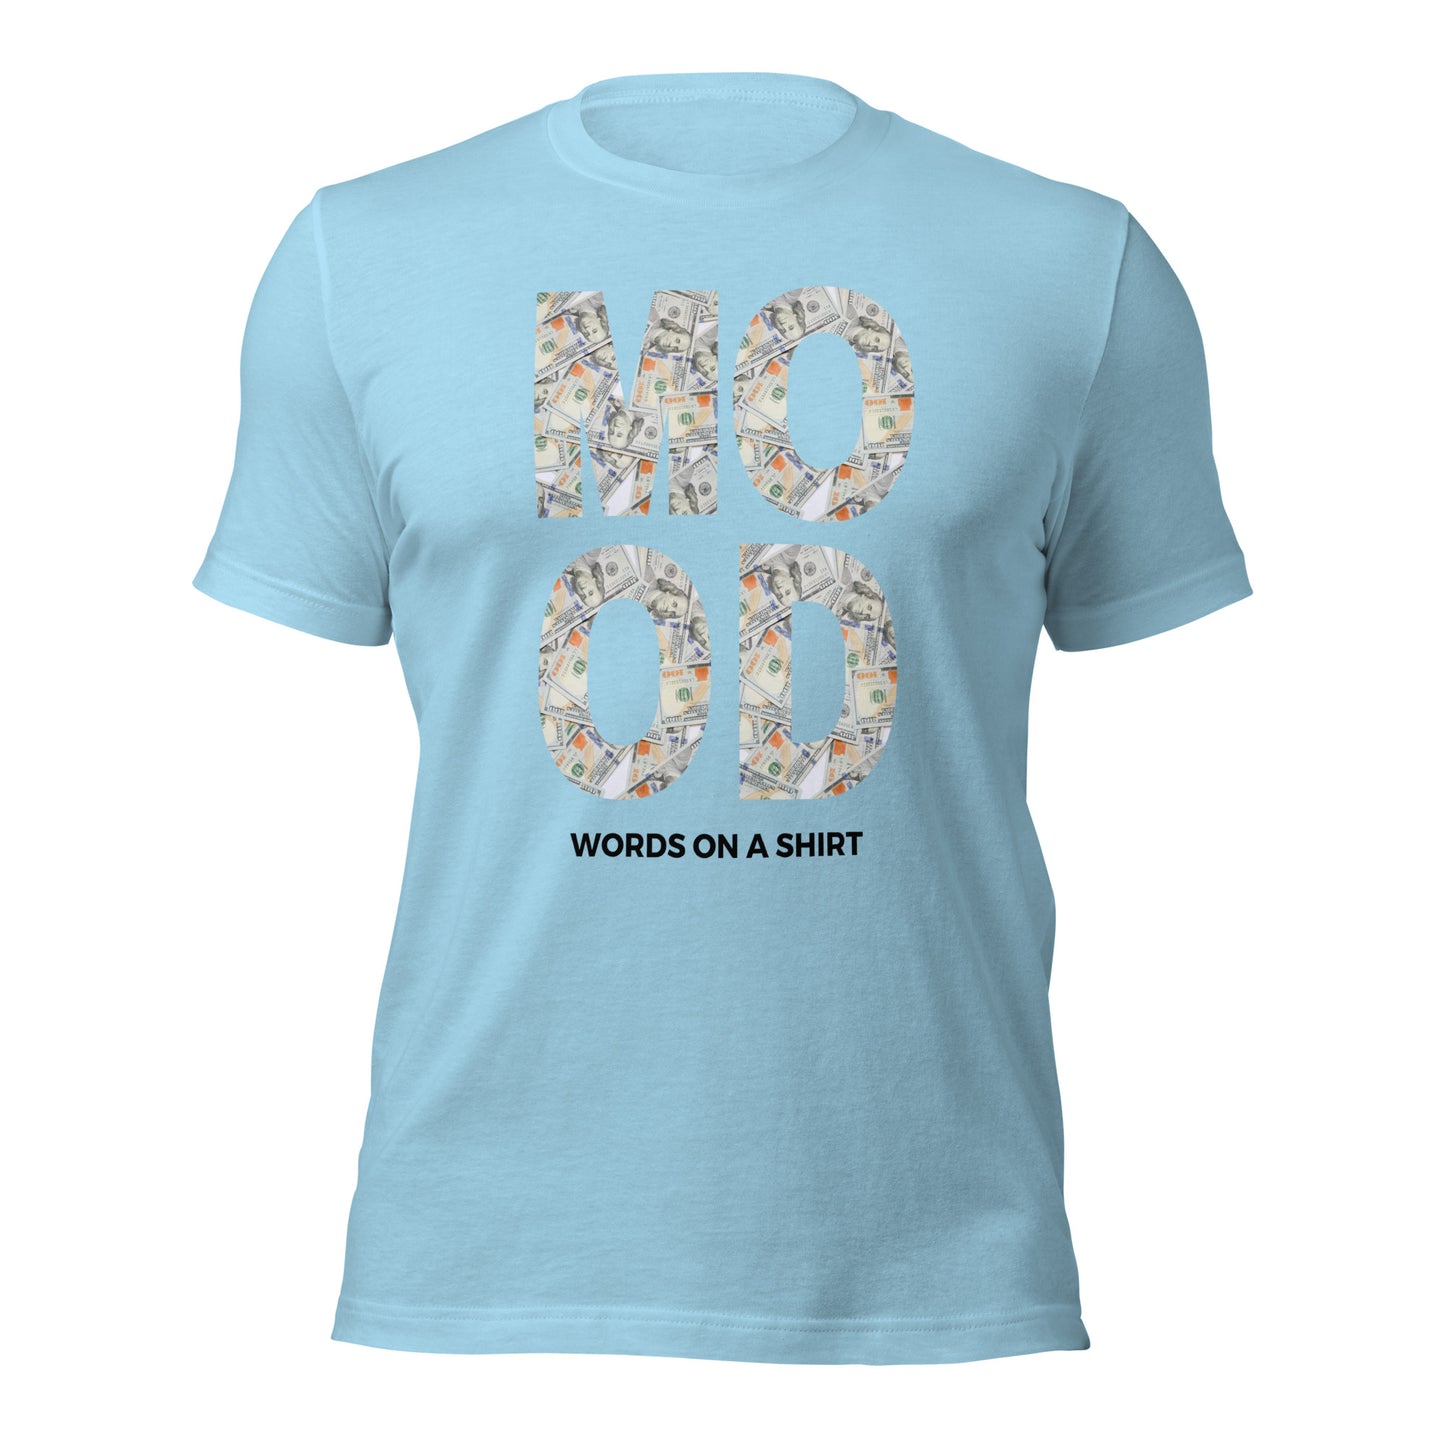 Get ready to flaunt your "money mood" with our Unisex T-Shirt! Soft, lightweight, and stretchy, it's everything you've dreamed of and more. Comfortable, flattering, and fun - perfect for showing off your playful side. 